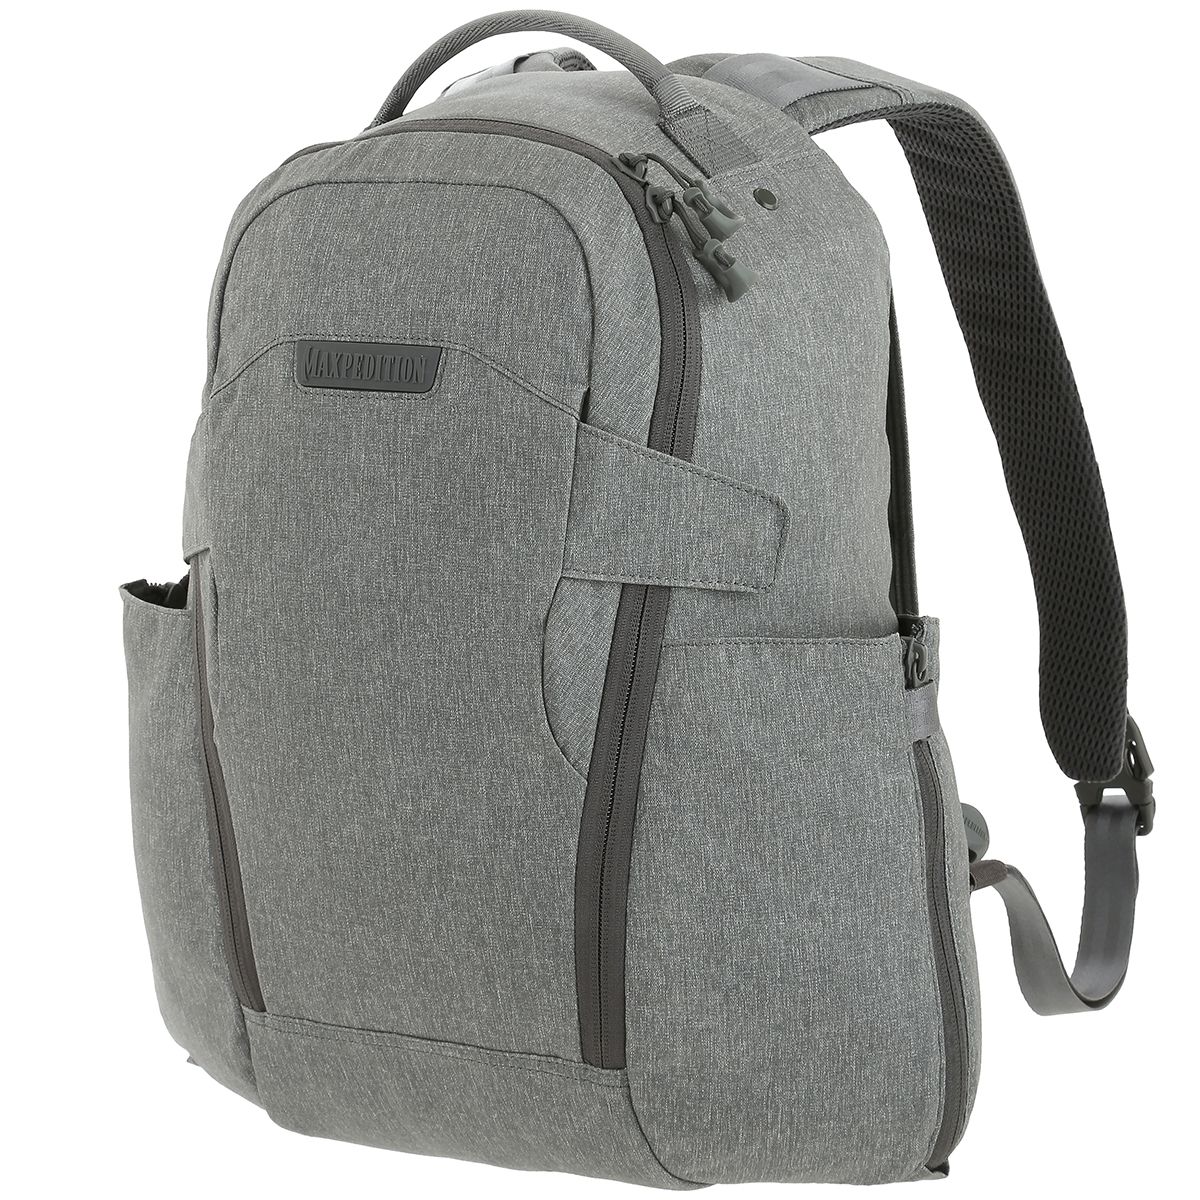 Maxpedition NTTPK19CH Entity 19 CCW-Enabled EDC Backpack 19L Charcoal